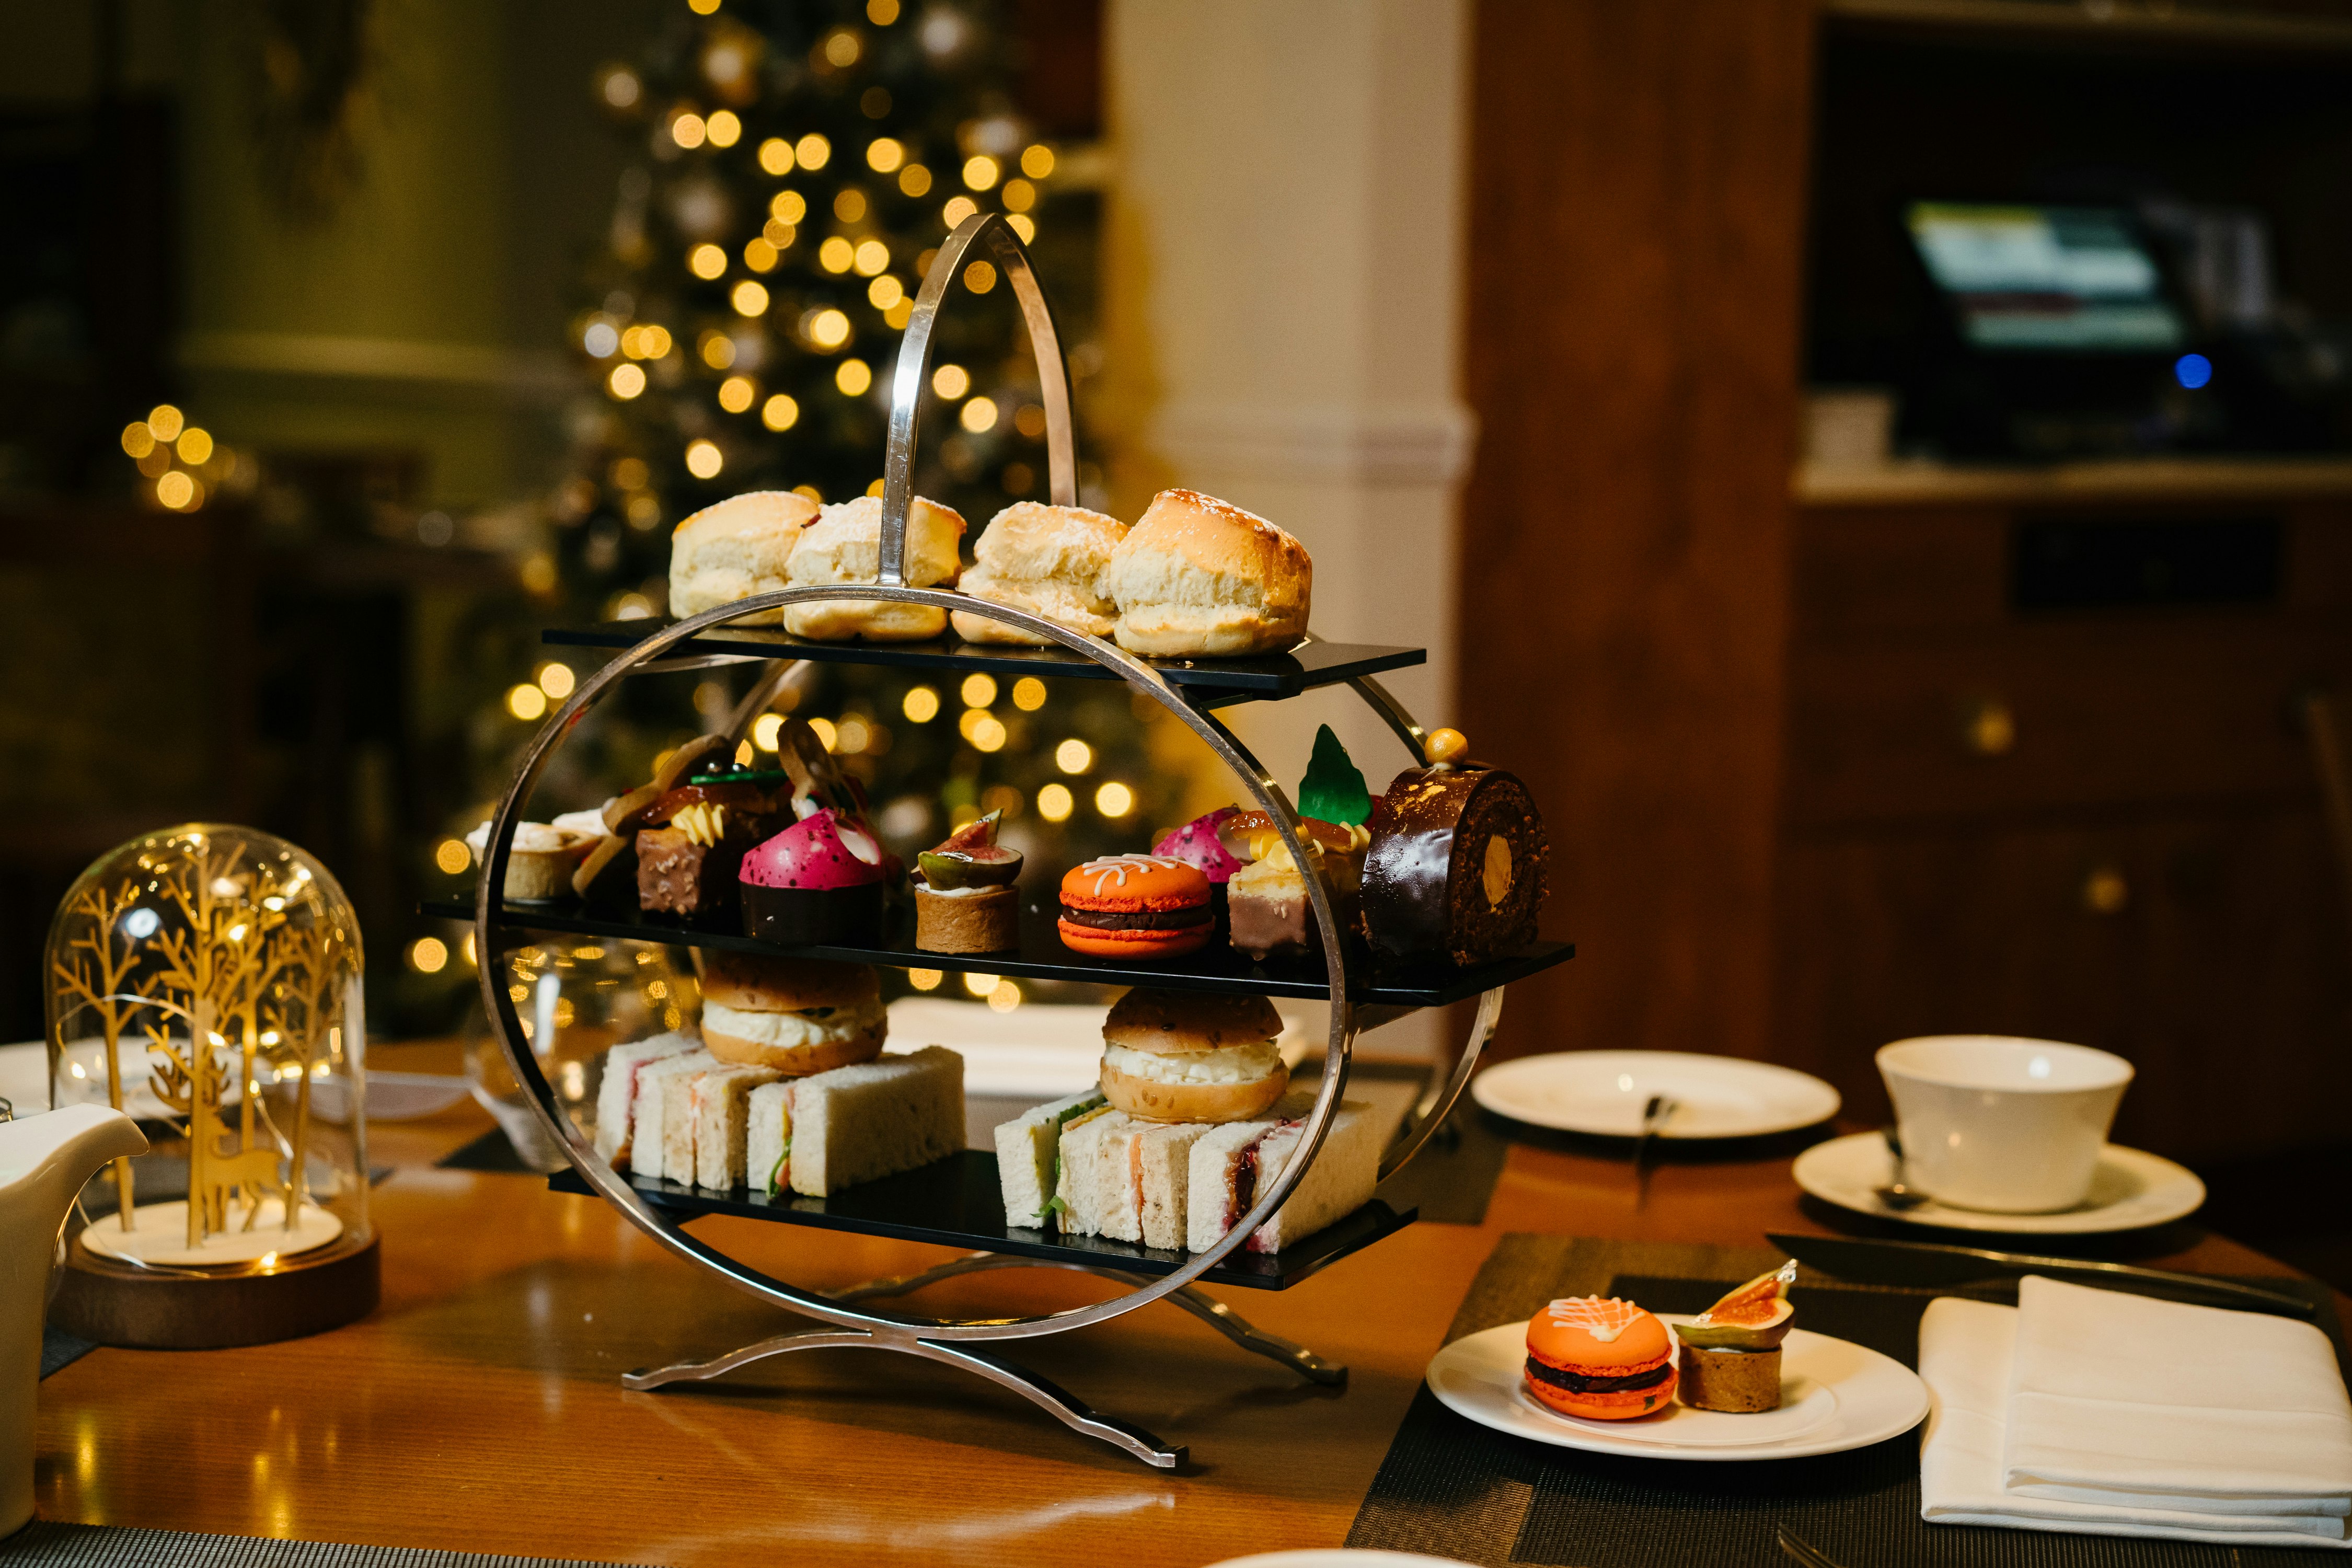 A silver cake stand sits on top of a wooden table, a Christmas tree with fairy lights twinkles in the background. There are cakes, scones and sandwiches stacked on the cake stand.